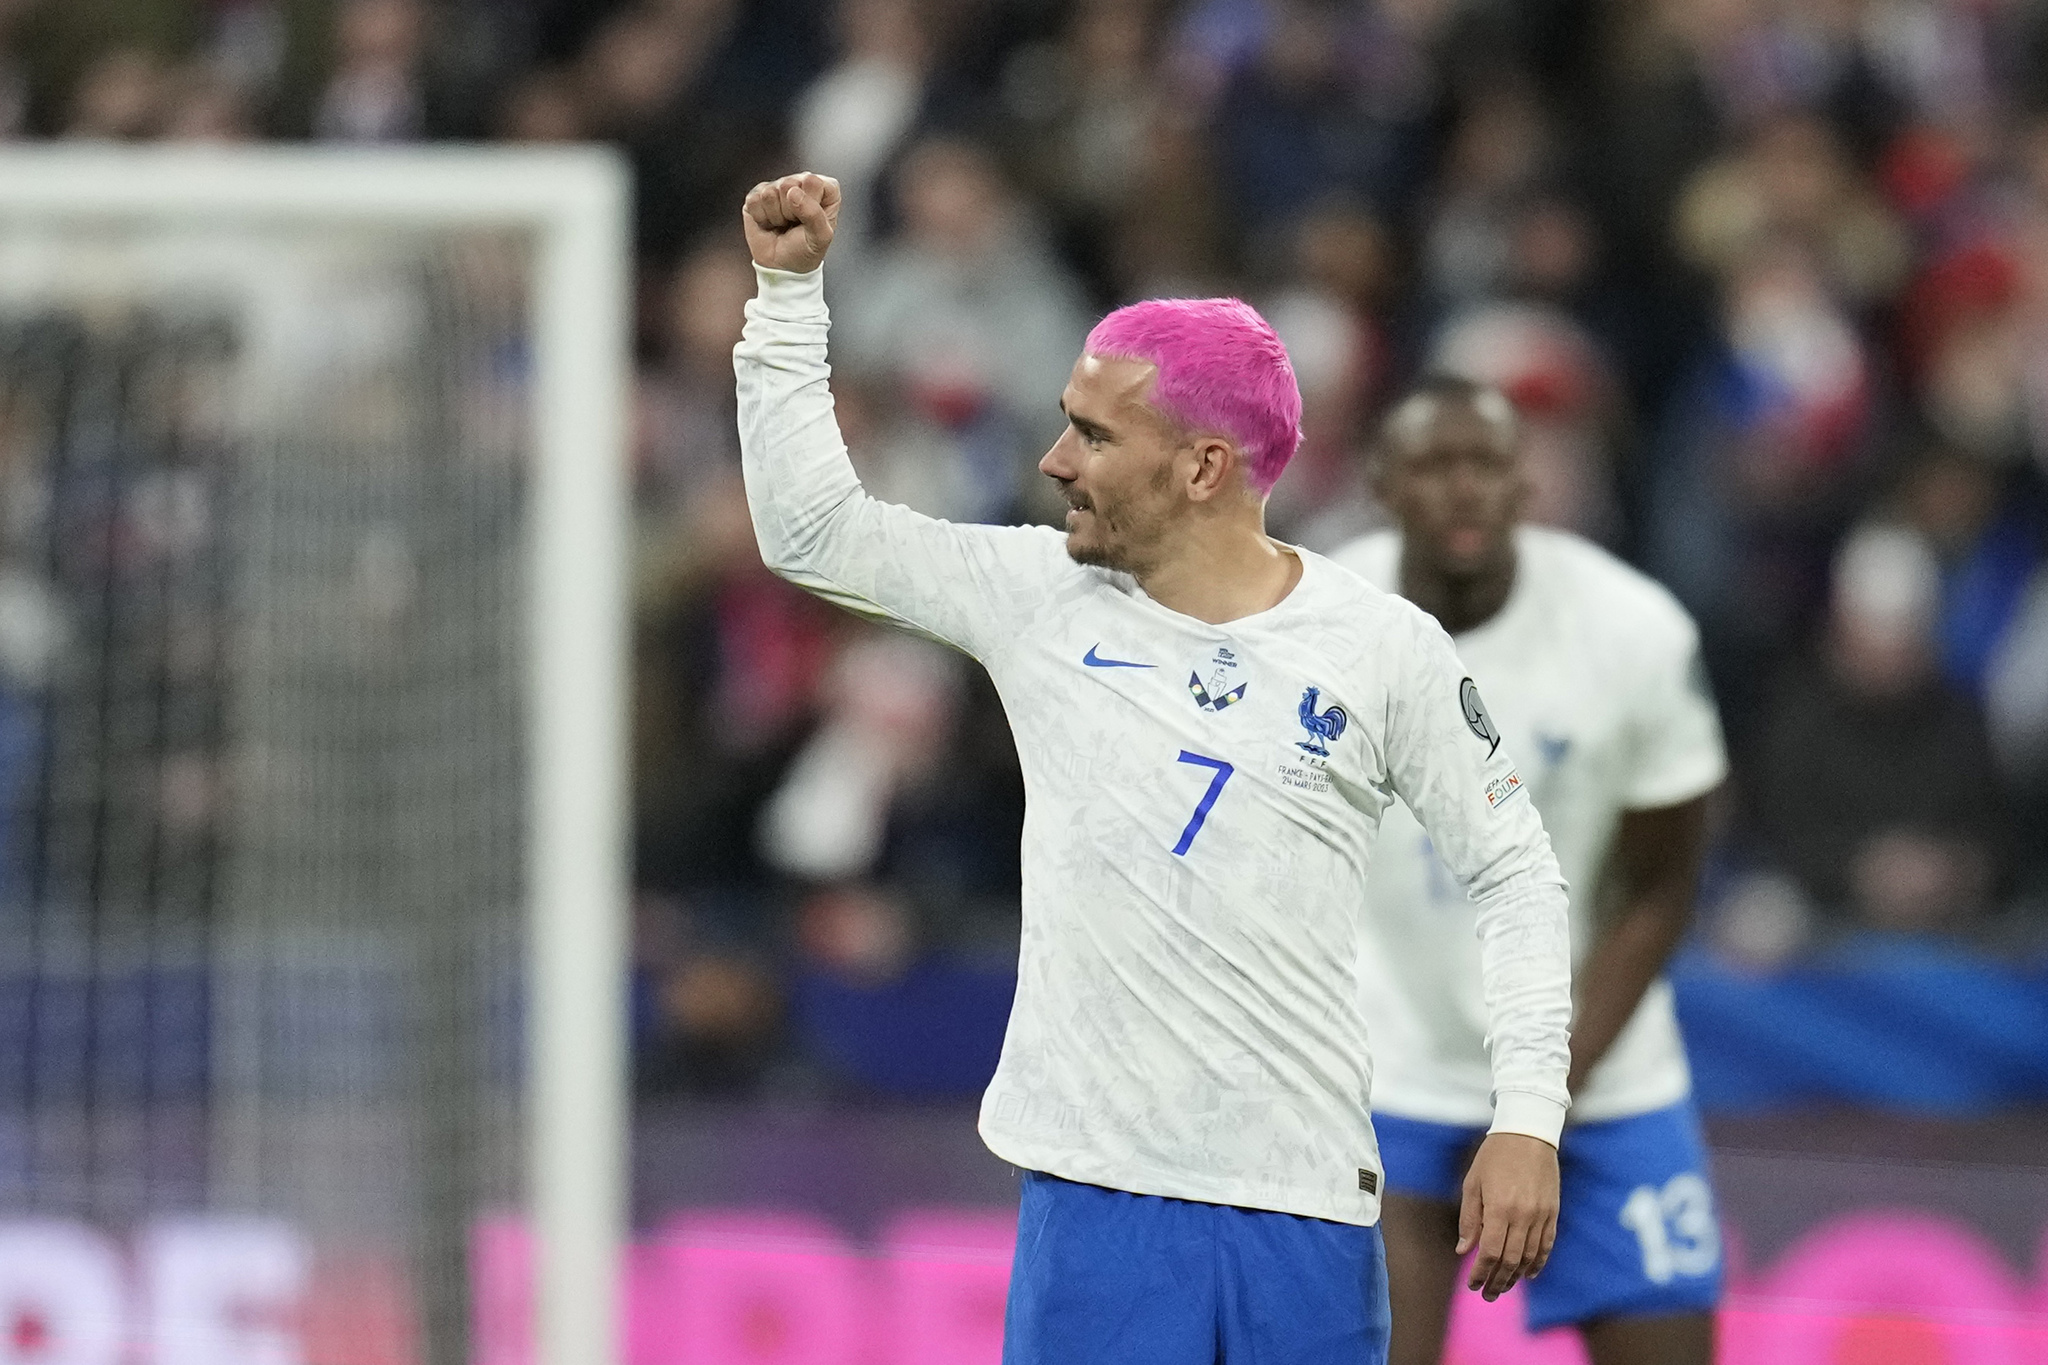  lt;HIT gt;France lt;/HIT gt;'s Antoine Griezmann celebrates after scoring his side's opening goal during the Euro 2024 group B qualifying soccer match between  lt;HIT gt;France lt;/HIT gt; and the Netherlands at the Stade de  lt;HIT gt;France lt;/HIT gt; in Saint Denis, outside Paris,  lt;HIT gt;France lt;/HIT gt;, Friday, March 24, 2023. (AP Photo/Christophe Ena)